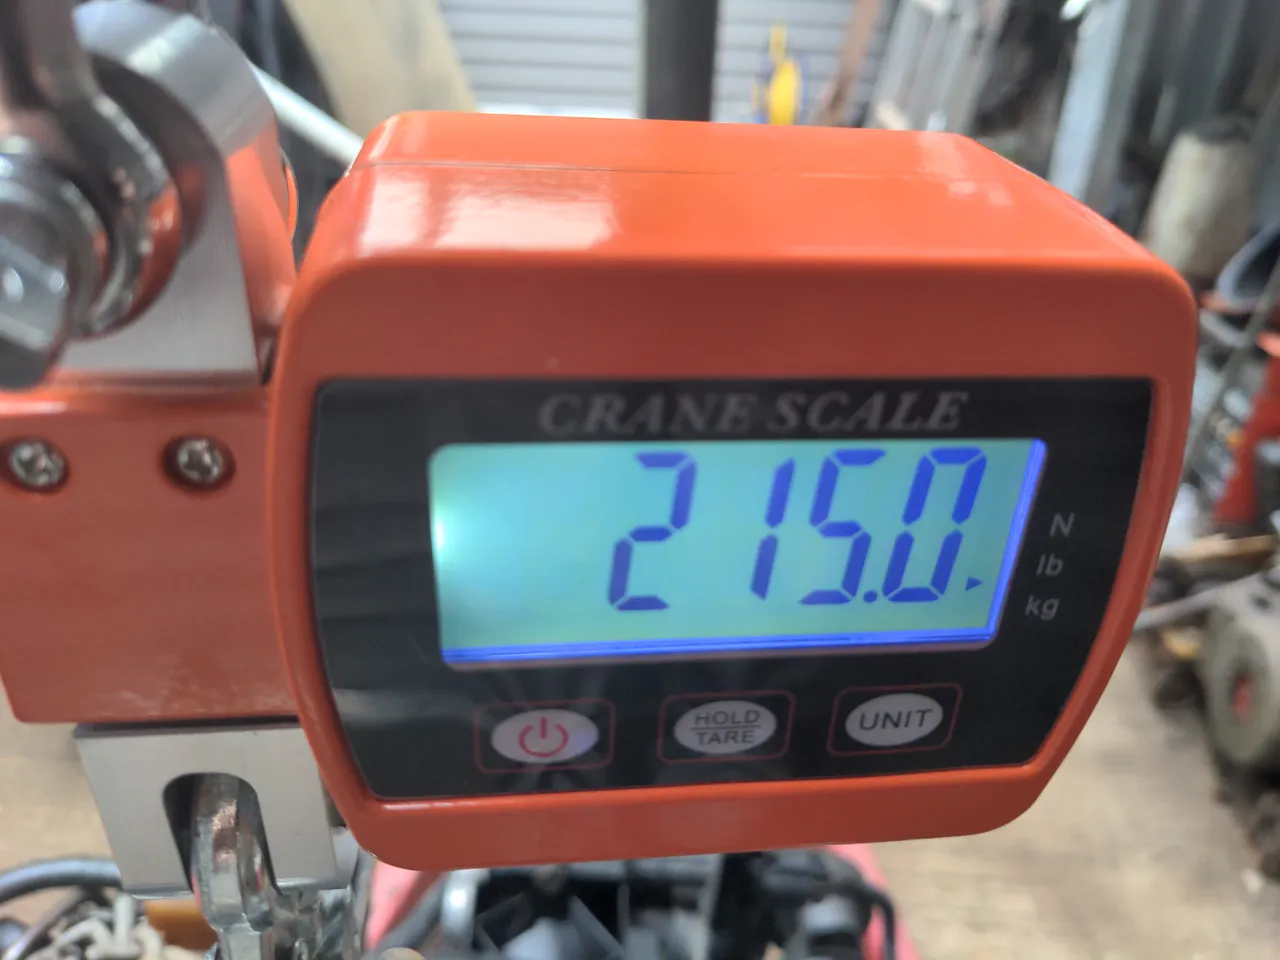 A crane scale showing a weight of 215 kilos. This is the weight of a GM LS1 engine.